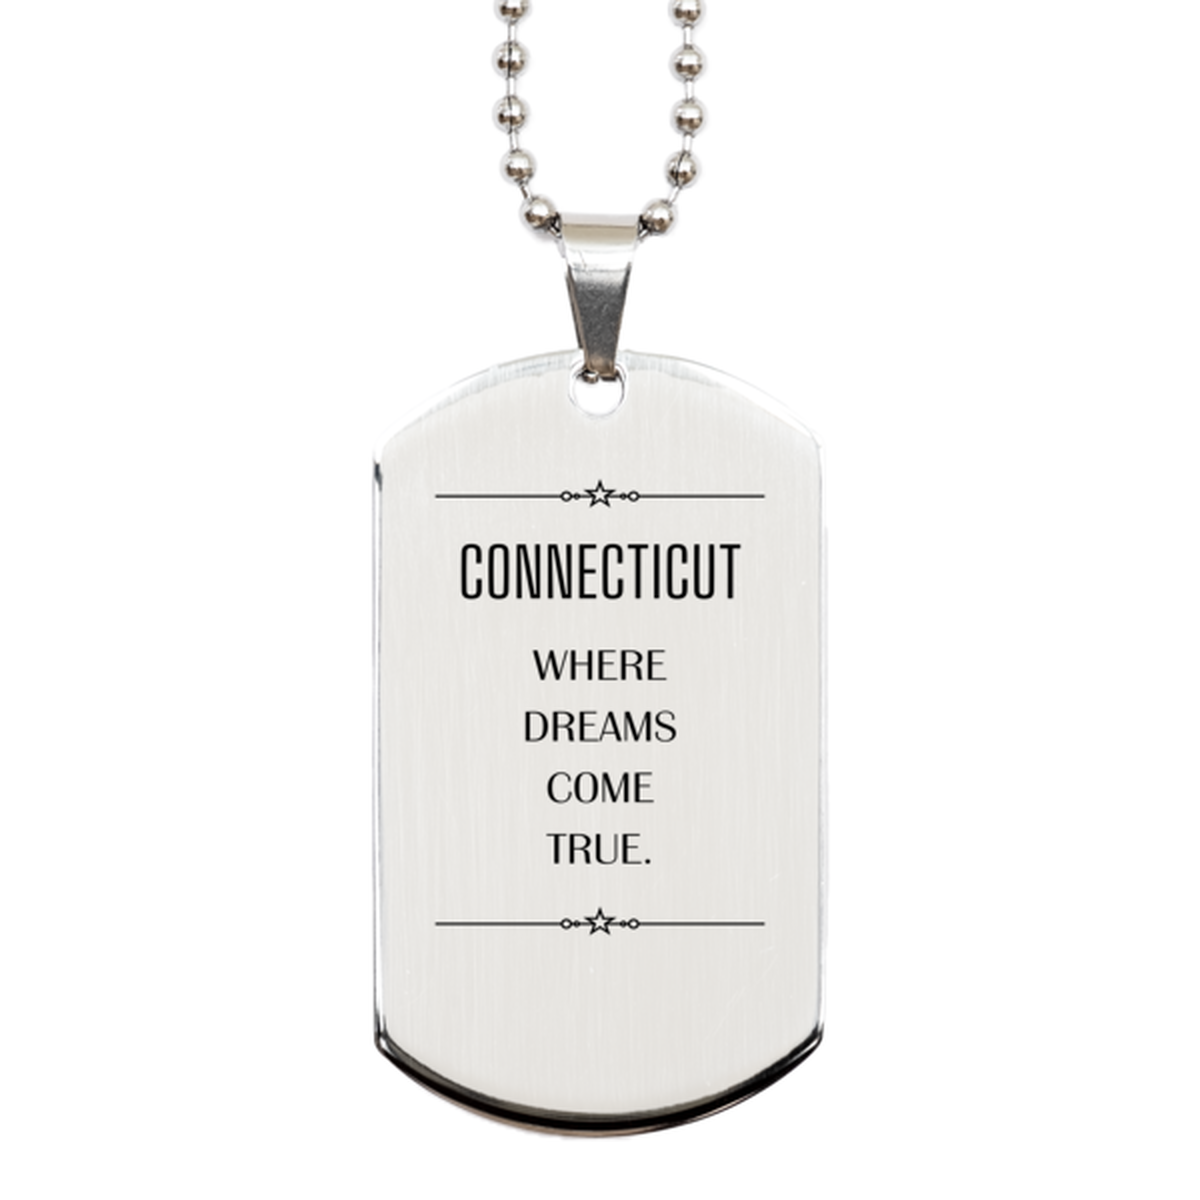 Love Connecticut State Silver Dog Tag, Connecticut Where dreams come true, Birthday Inspirational Gifts For Connecticut Men, Women, Friends